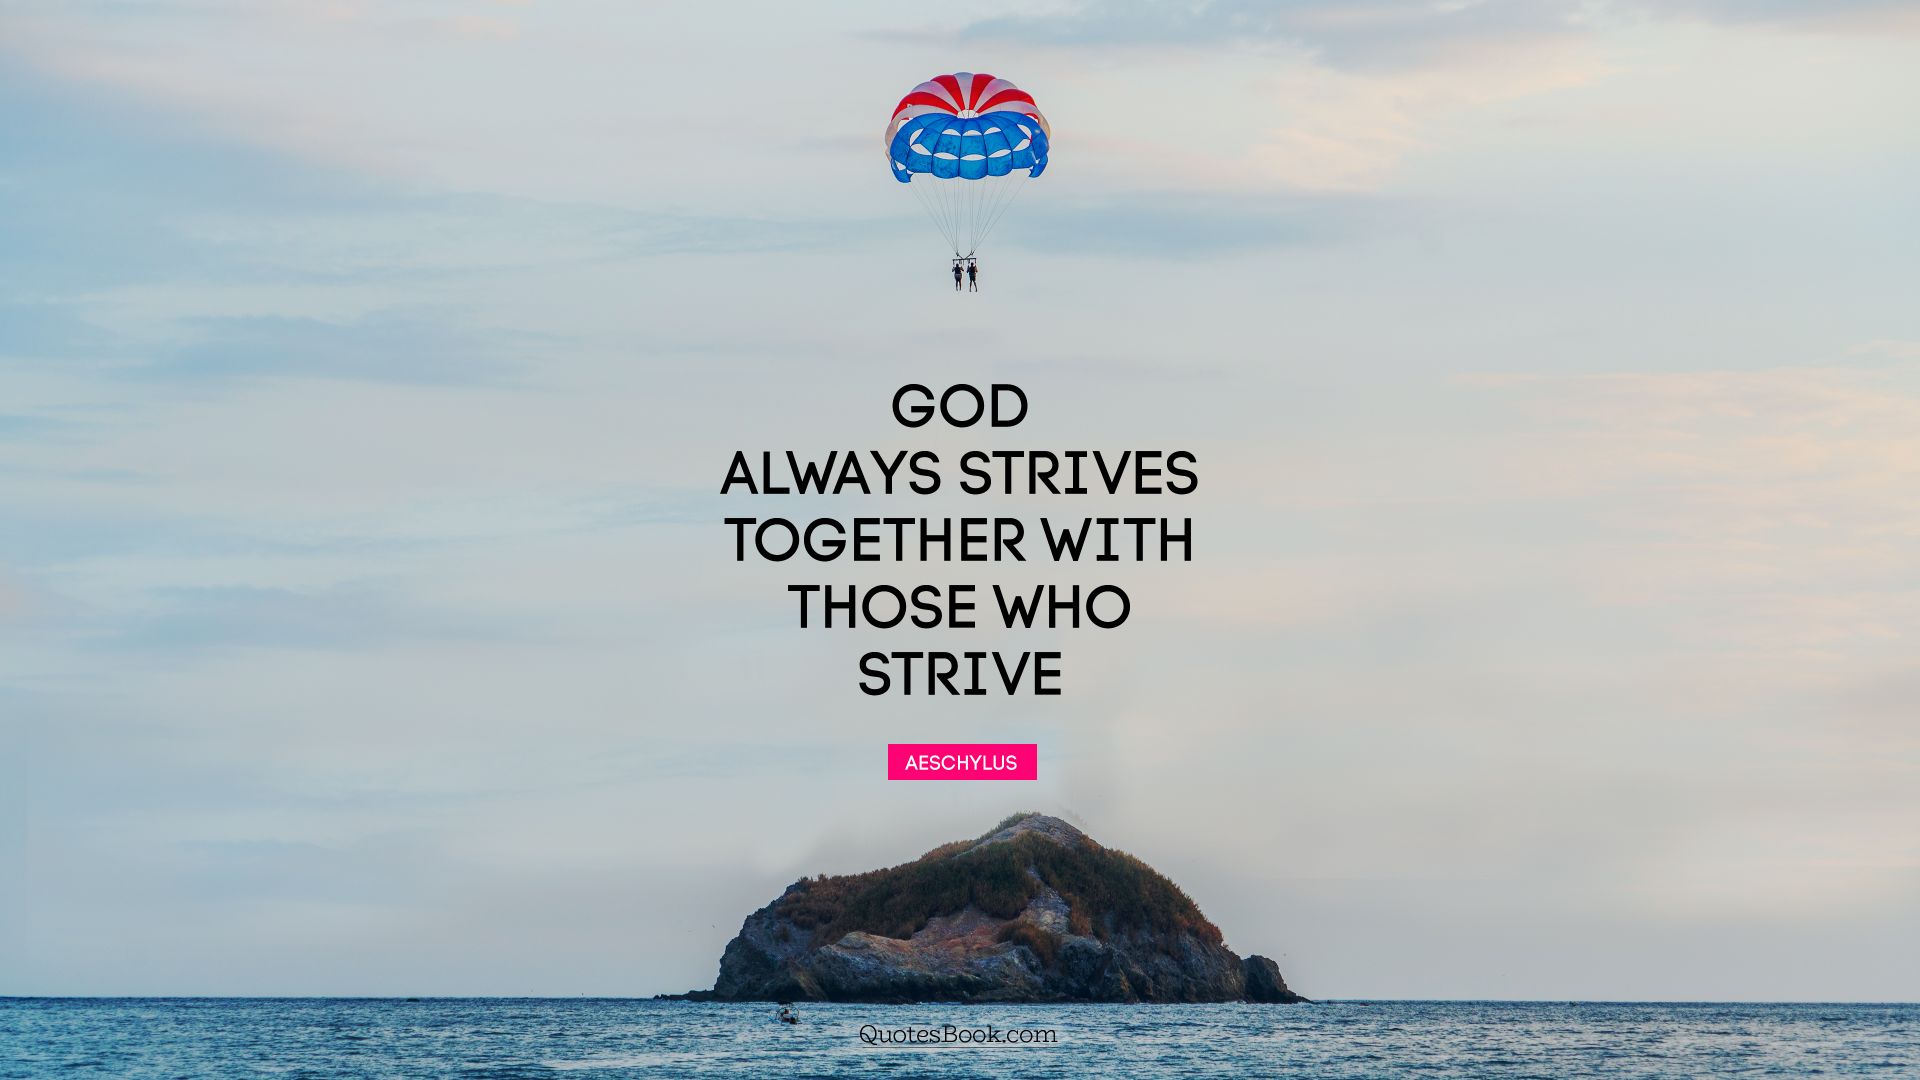 God always strives together with those who strive. - Quote by Aeschylus